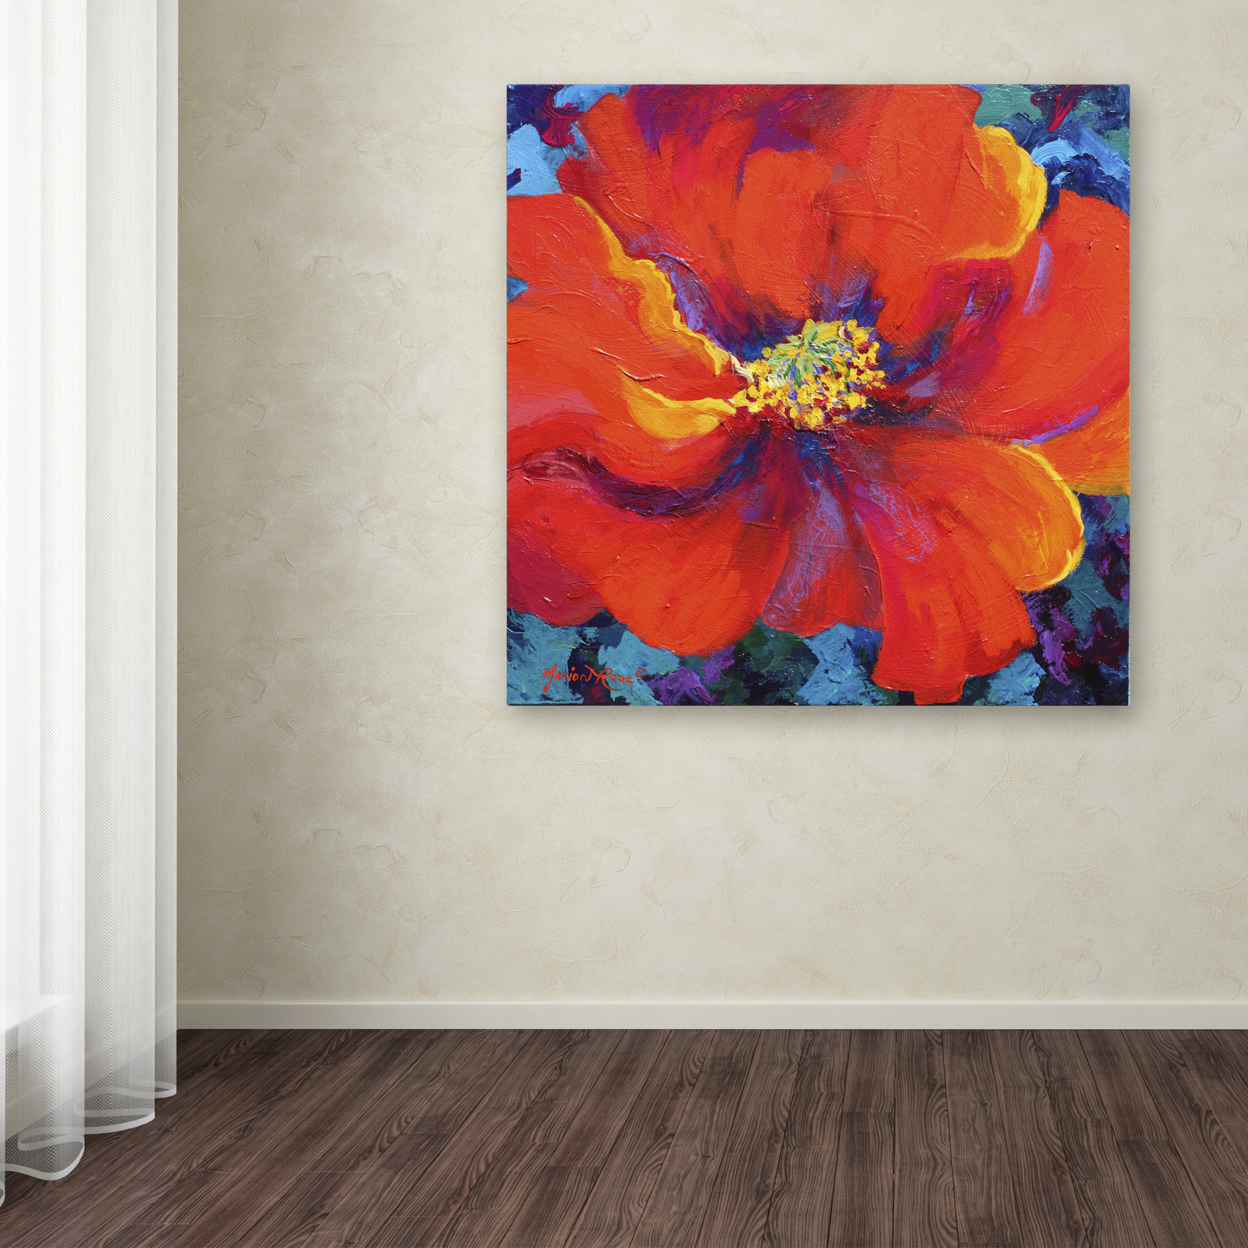 Marion Rose 'Passion Poppy' Ready To Hang Canvas Art 18 X 18 Inches Made In USA